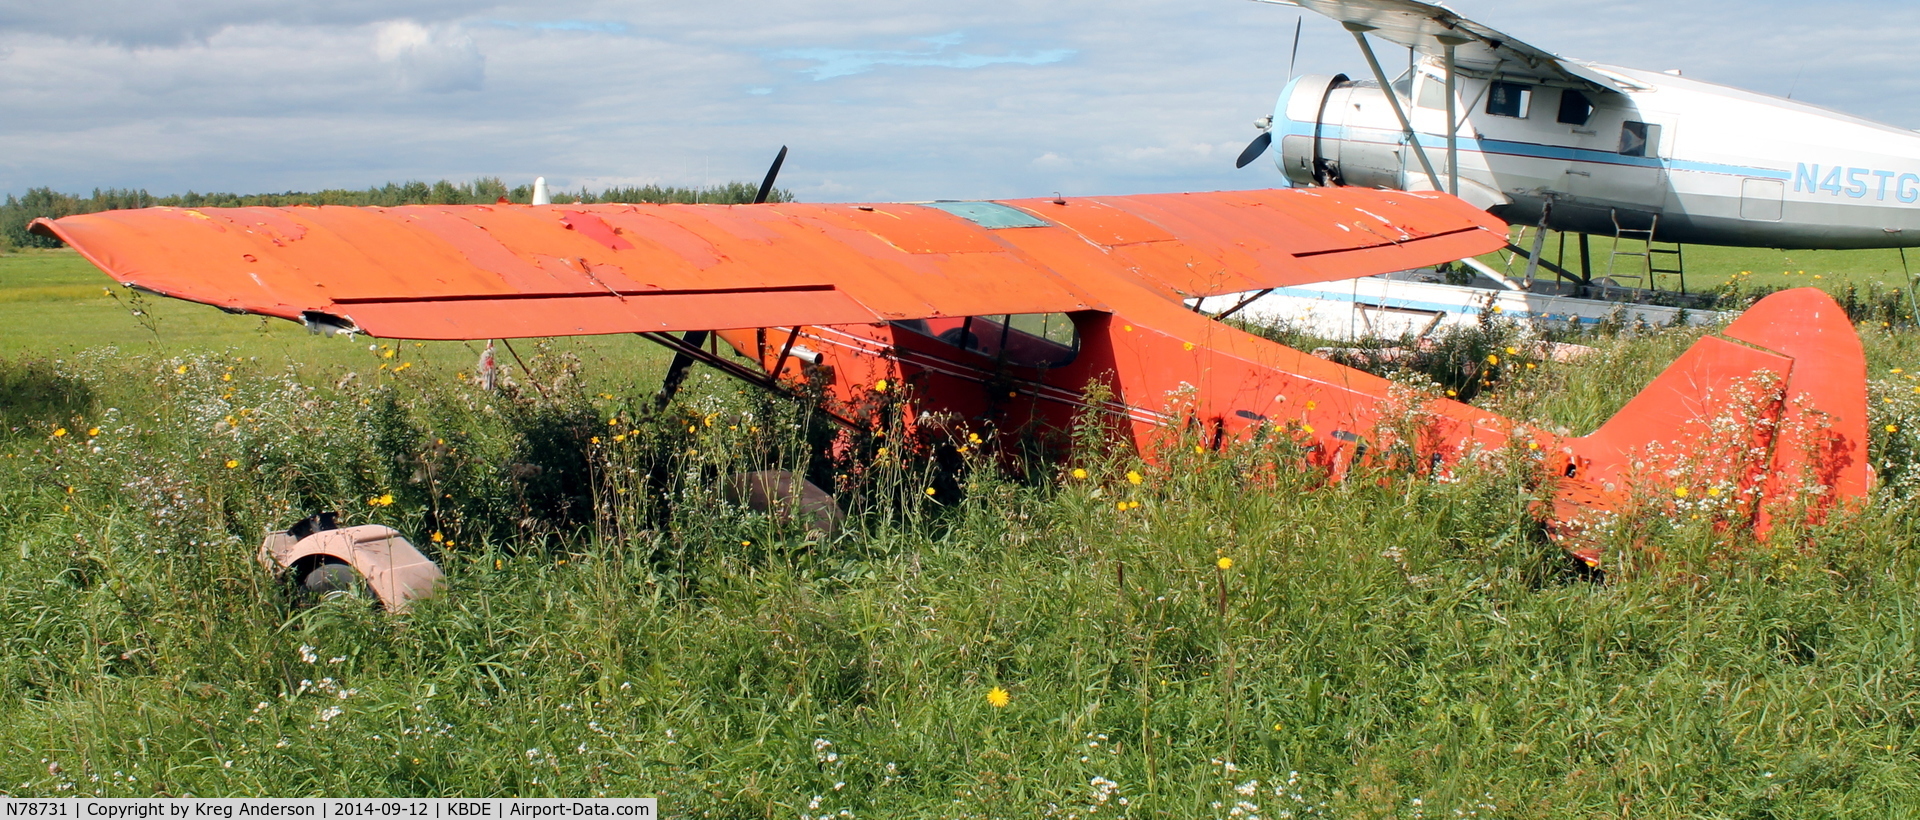 N78731, Piper PA-11 Cub Special C/N 11-1483, Piper PA-11 Cub Special in the weeds in Baudette, MN.